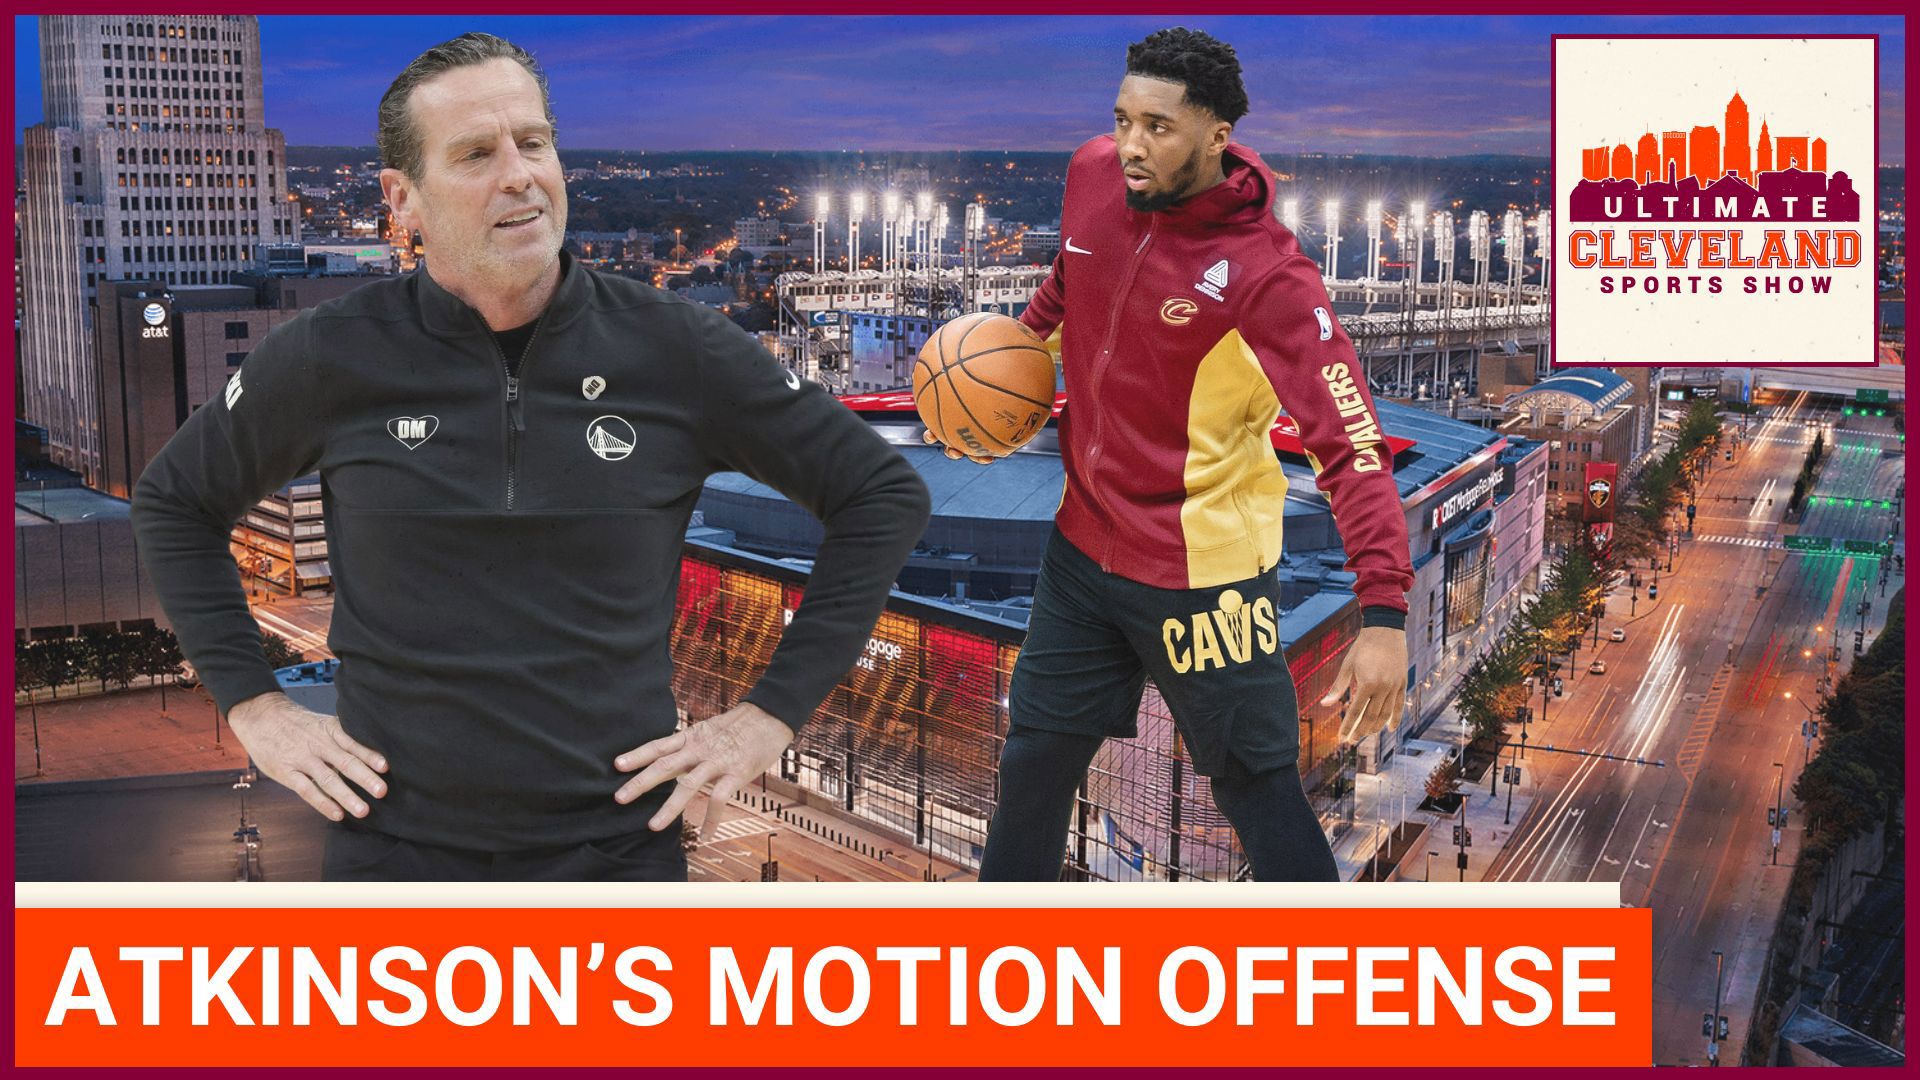 What does Kenny Atkinson's motion offense look like? UCSS has the conversation